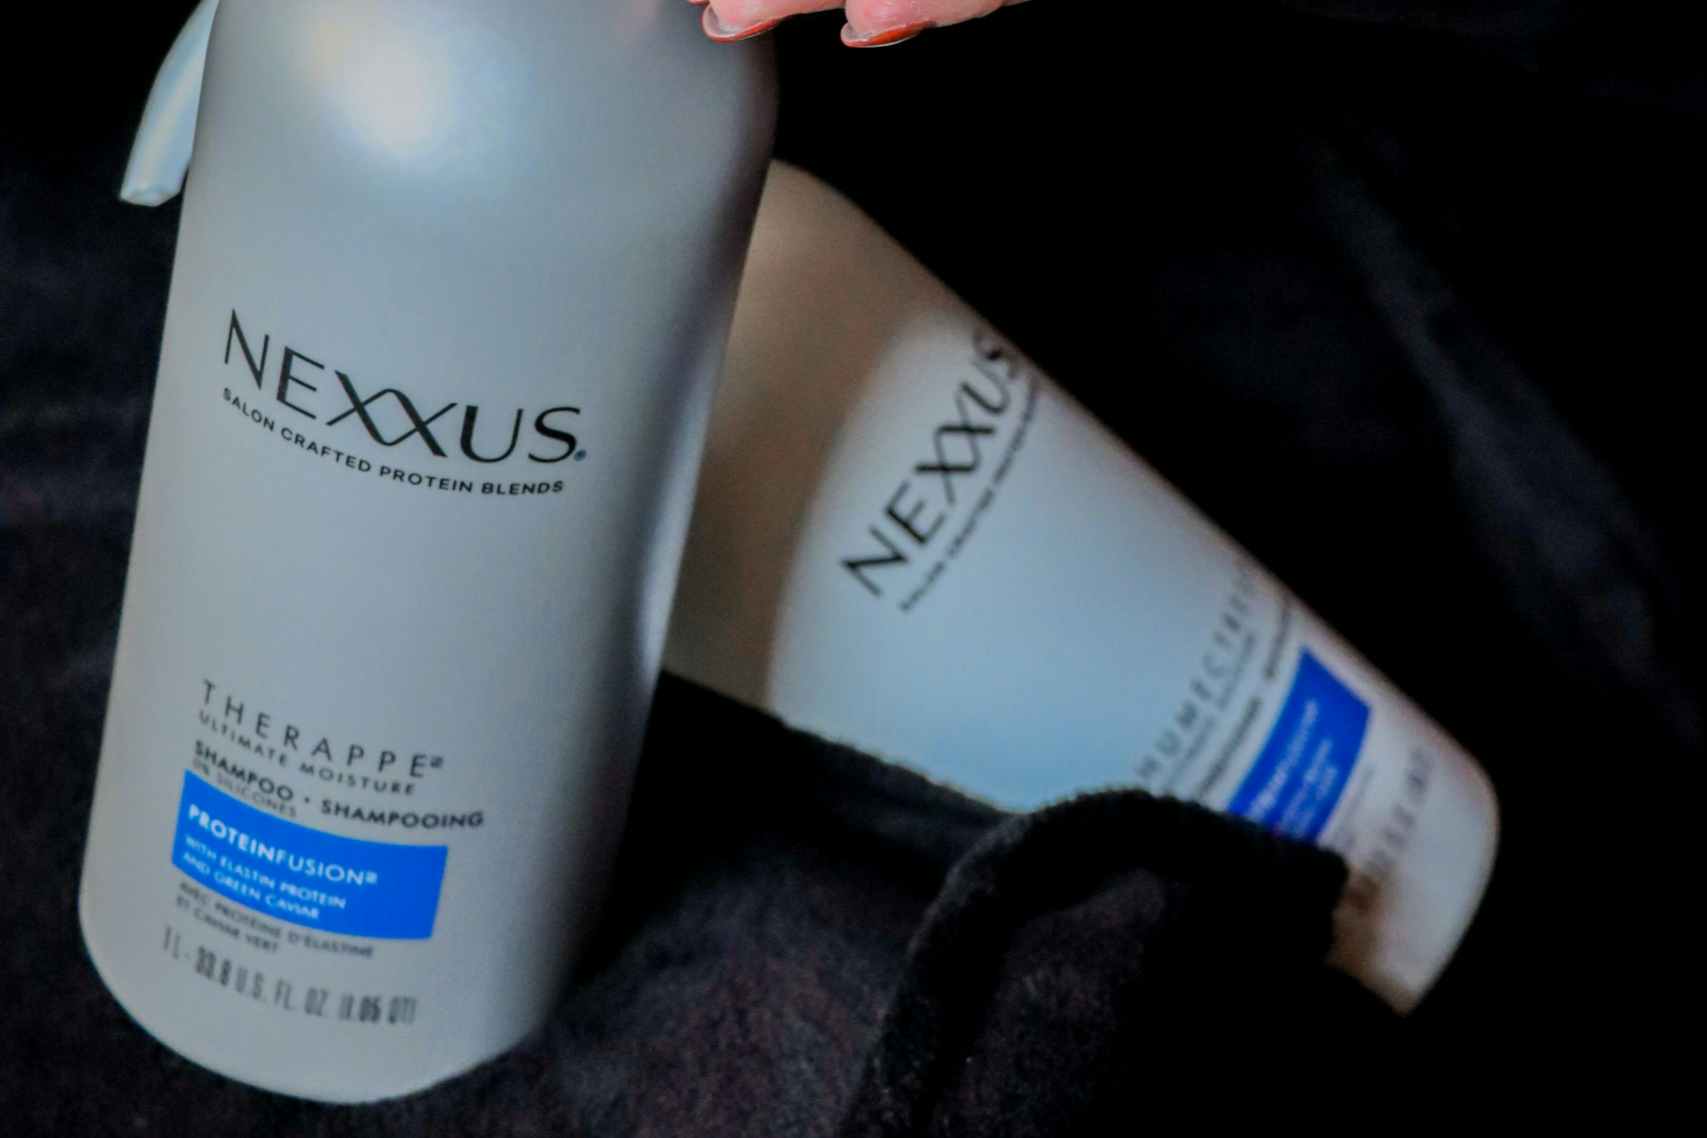 Nexxus Shampoo and Conditioner: Get 4 Bottles for $47.83 on Amazon